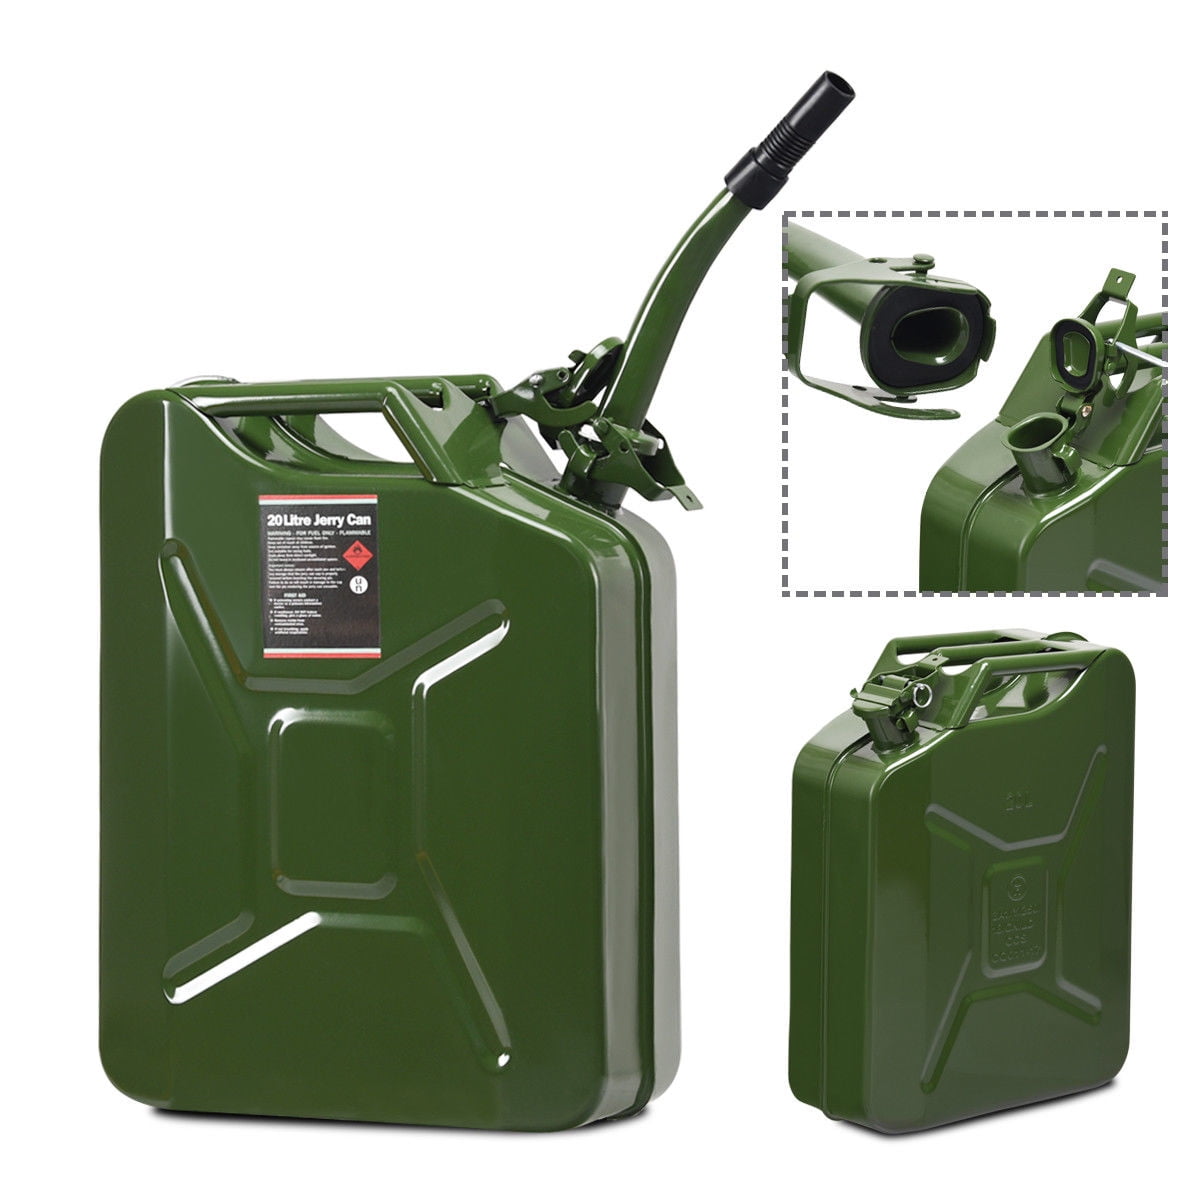 2x Jerry Can Fuel Tank w/ Holder Steel 5Gallon 20L Nato Style Military Green 